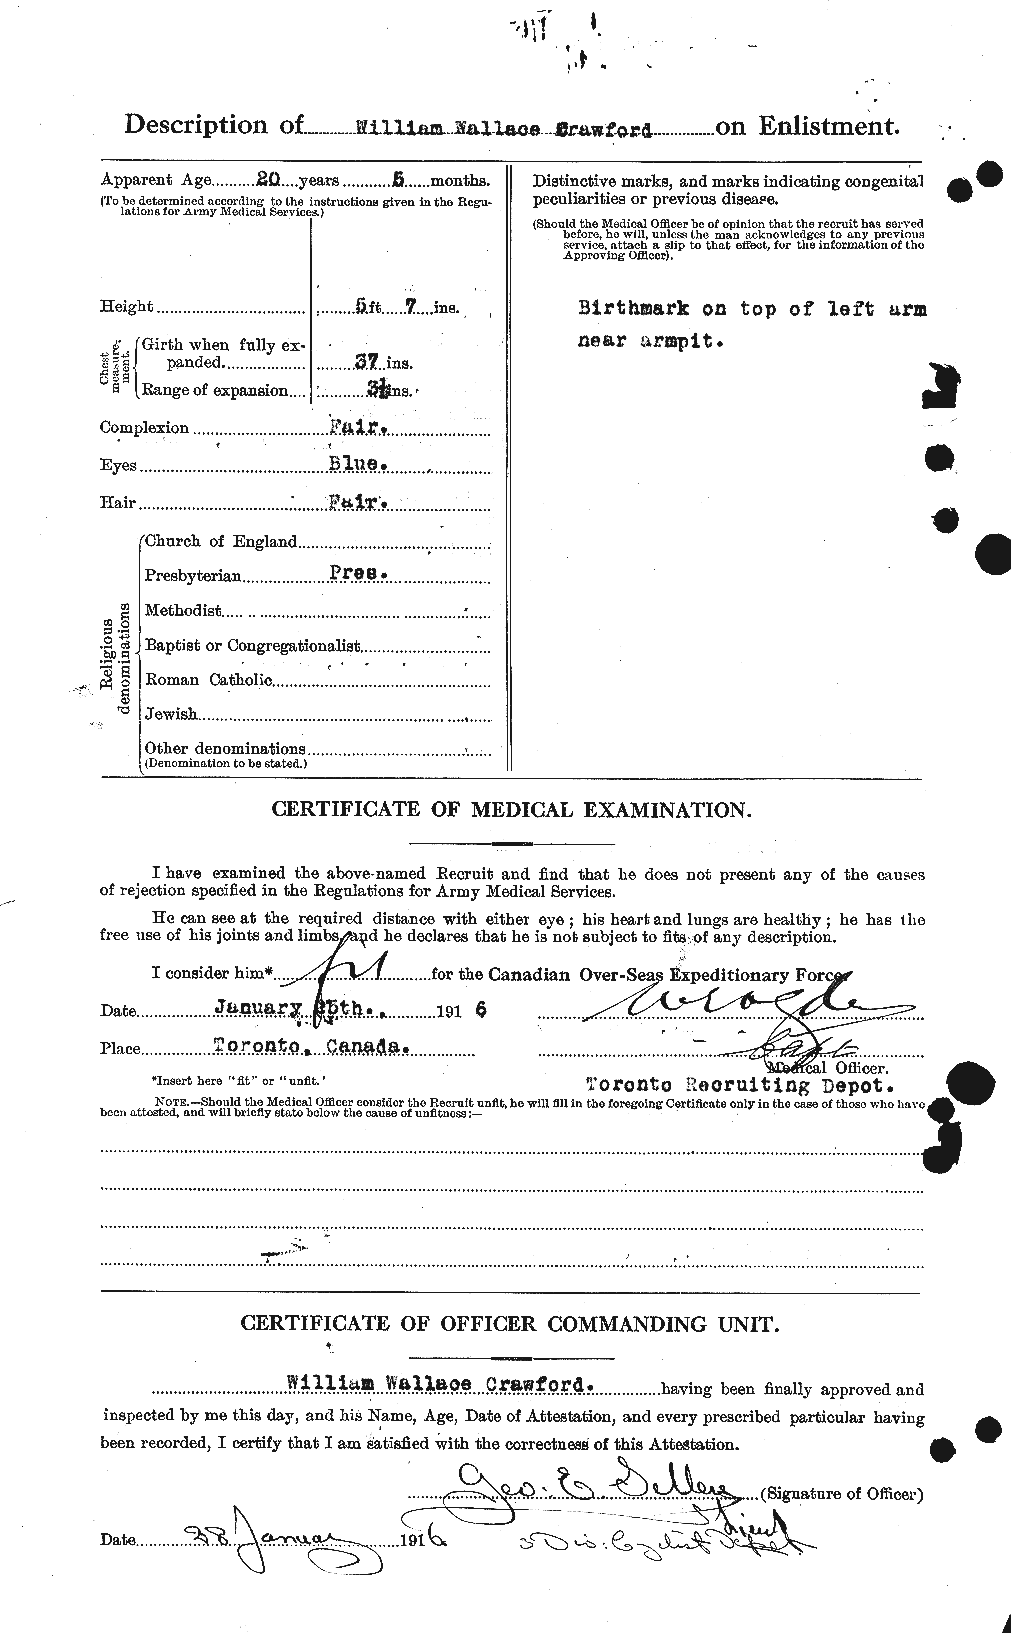 Personnel Records of the First World War - CEF 060683b